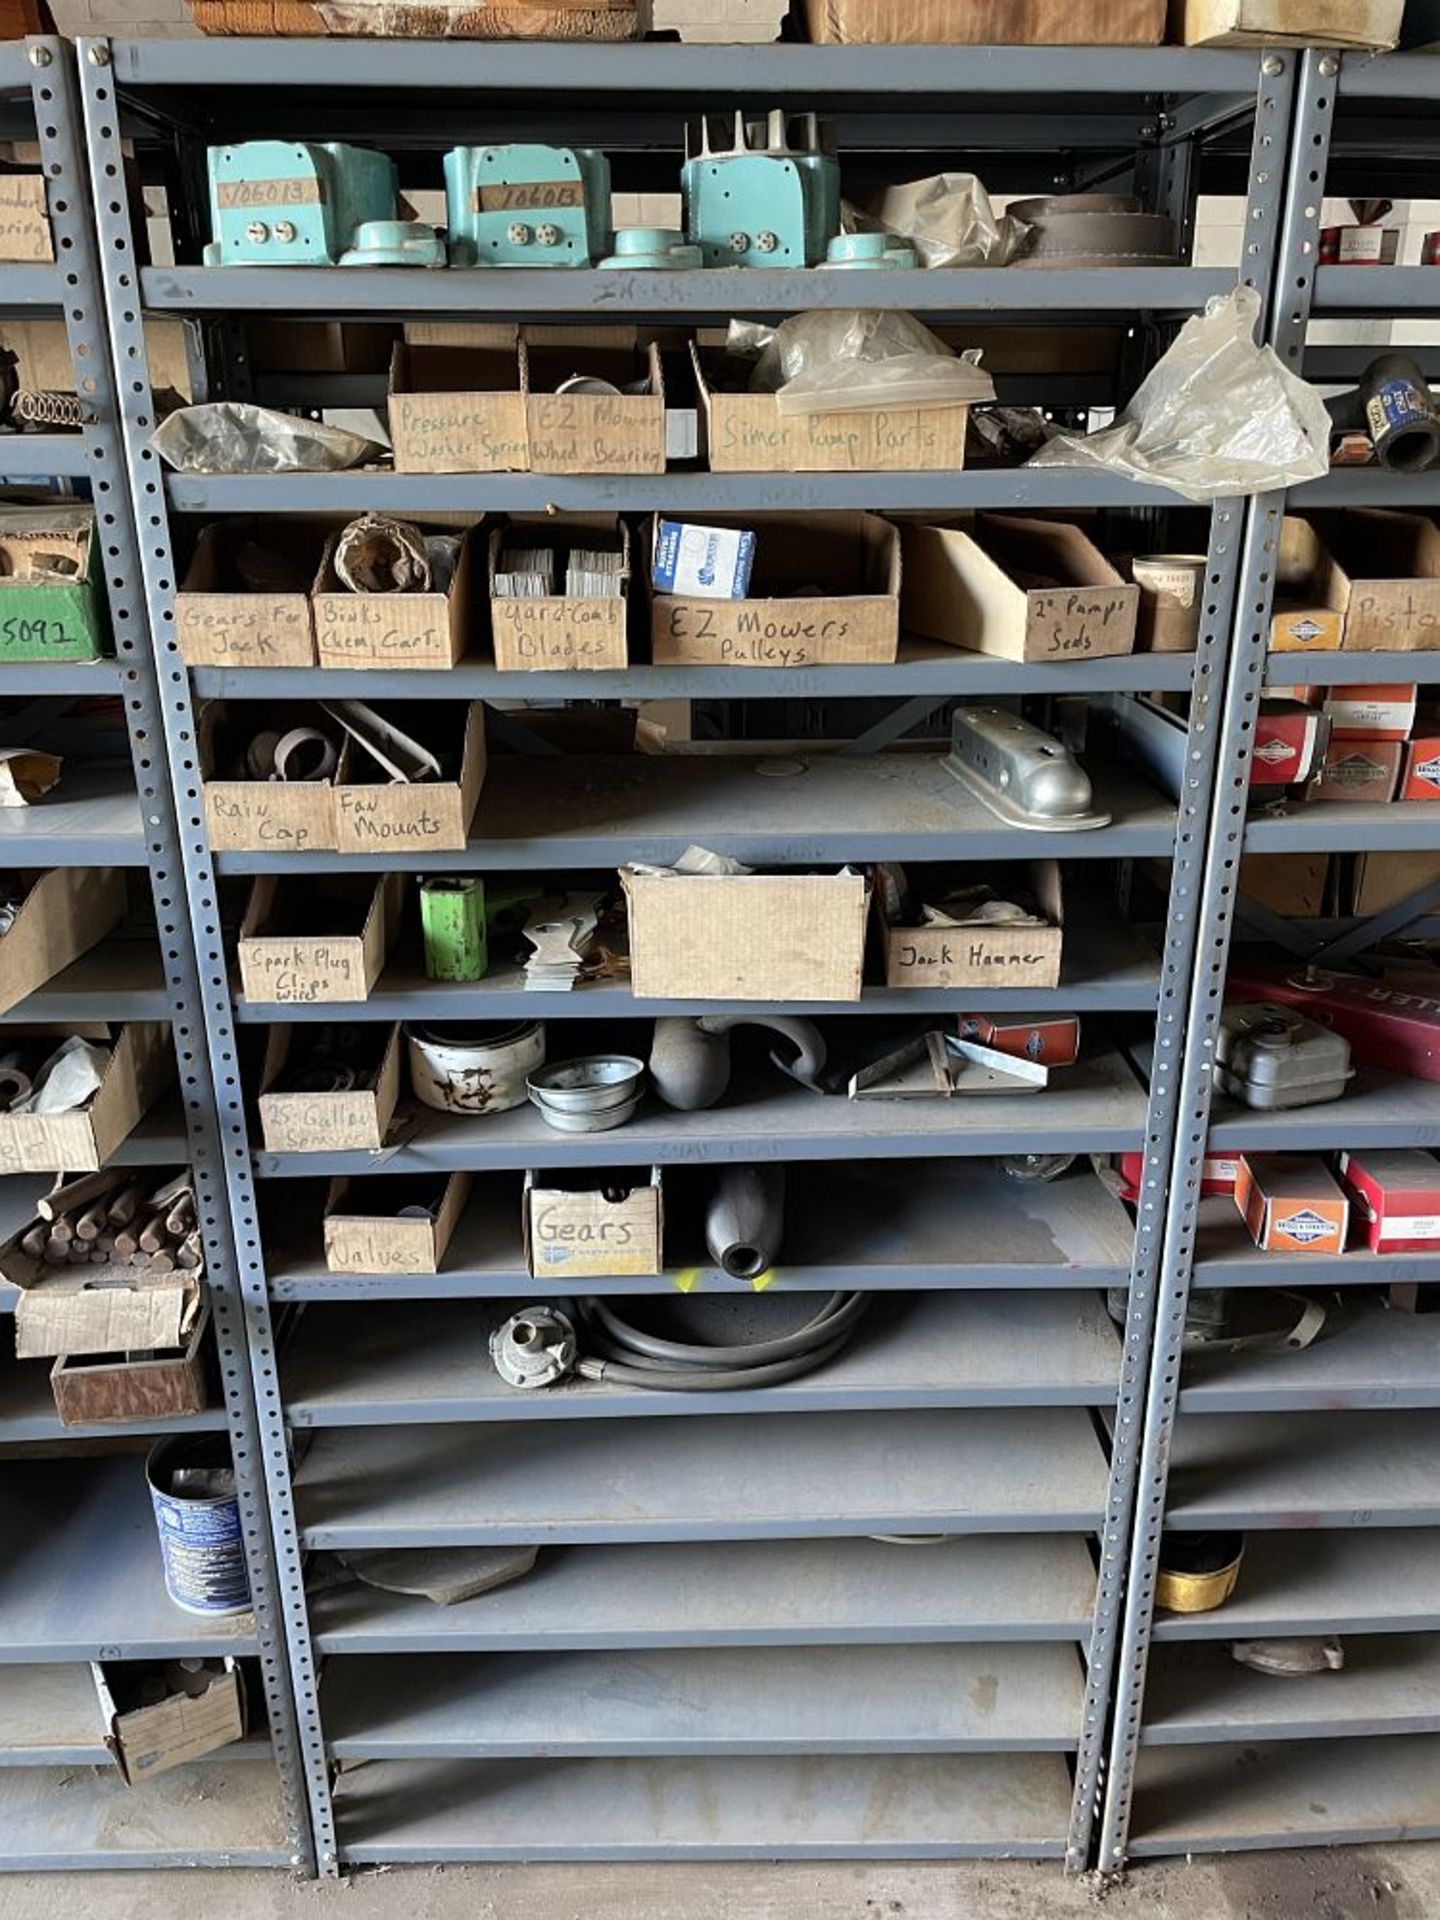 Parts Department: Contents & Shelves, 16 sections - Image 7 of 16